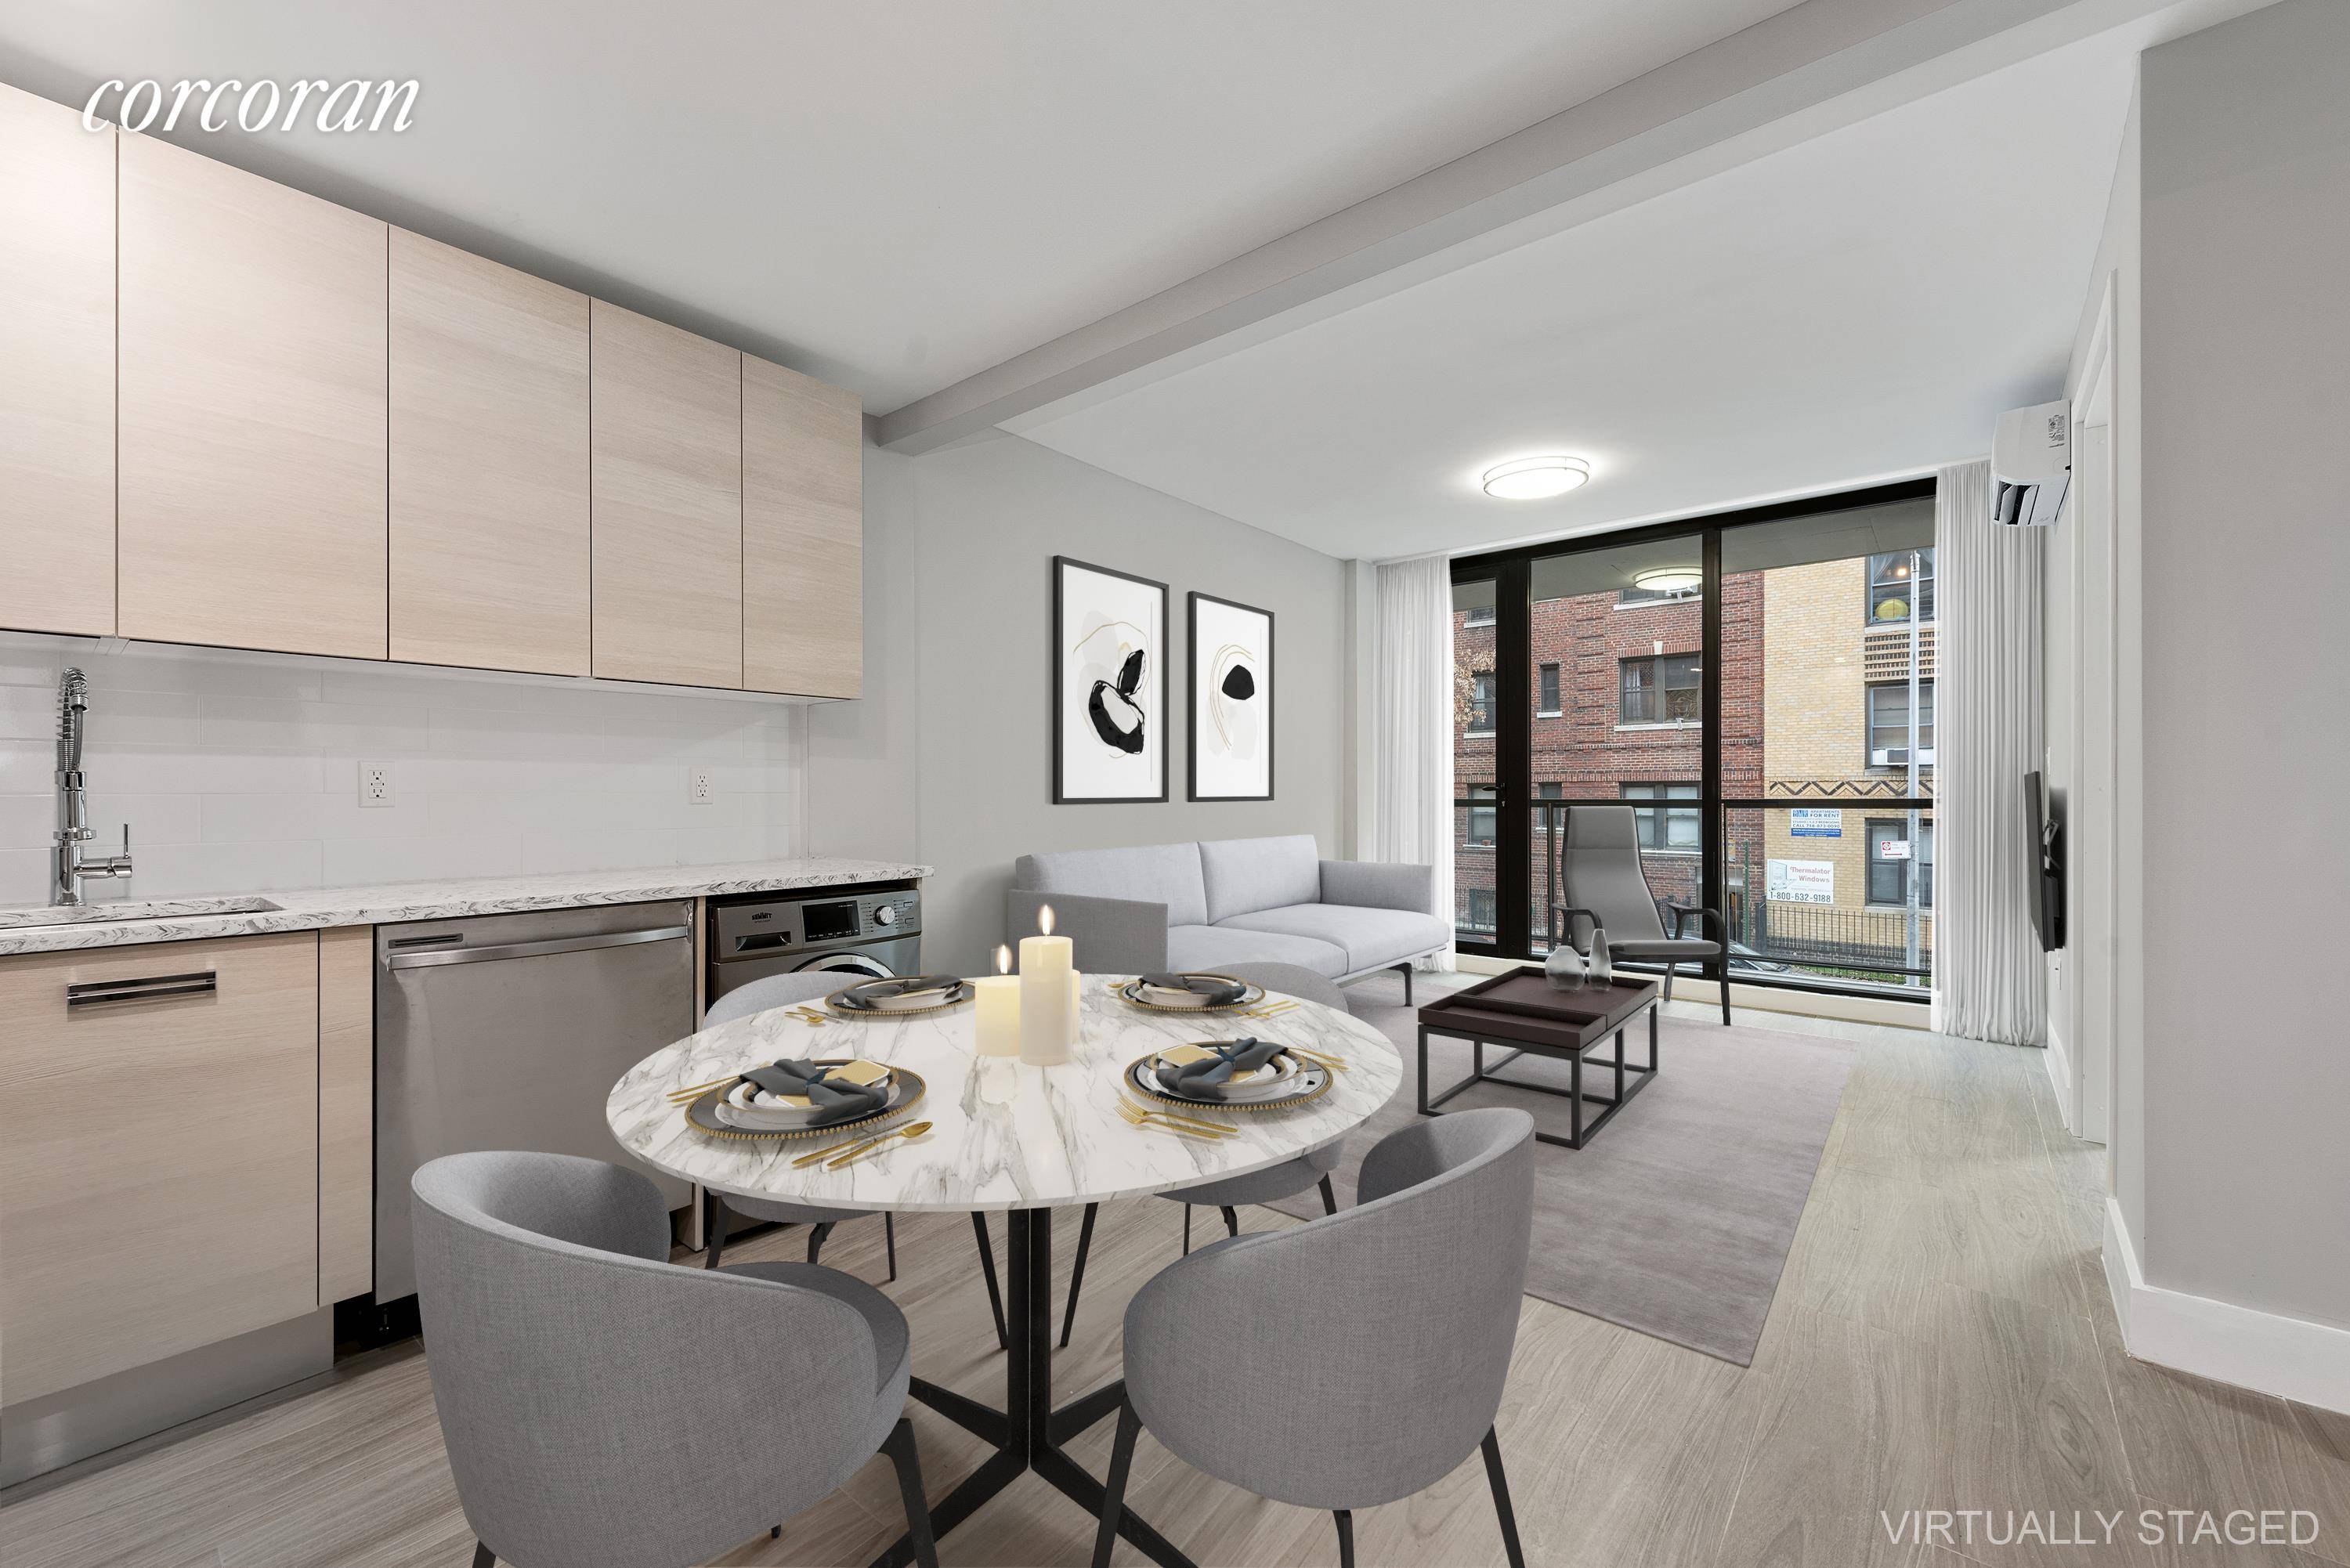 Brand new 29 unit Condo situated in the historic neighborhood of Prospect Park South !